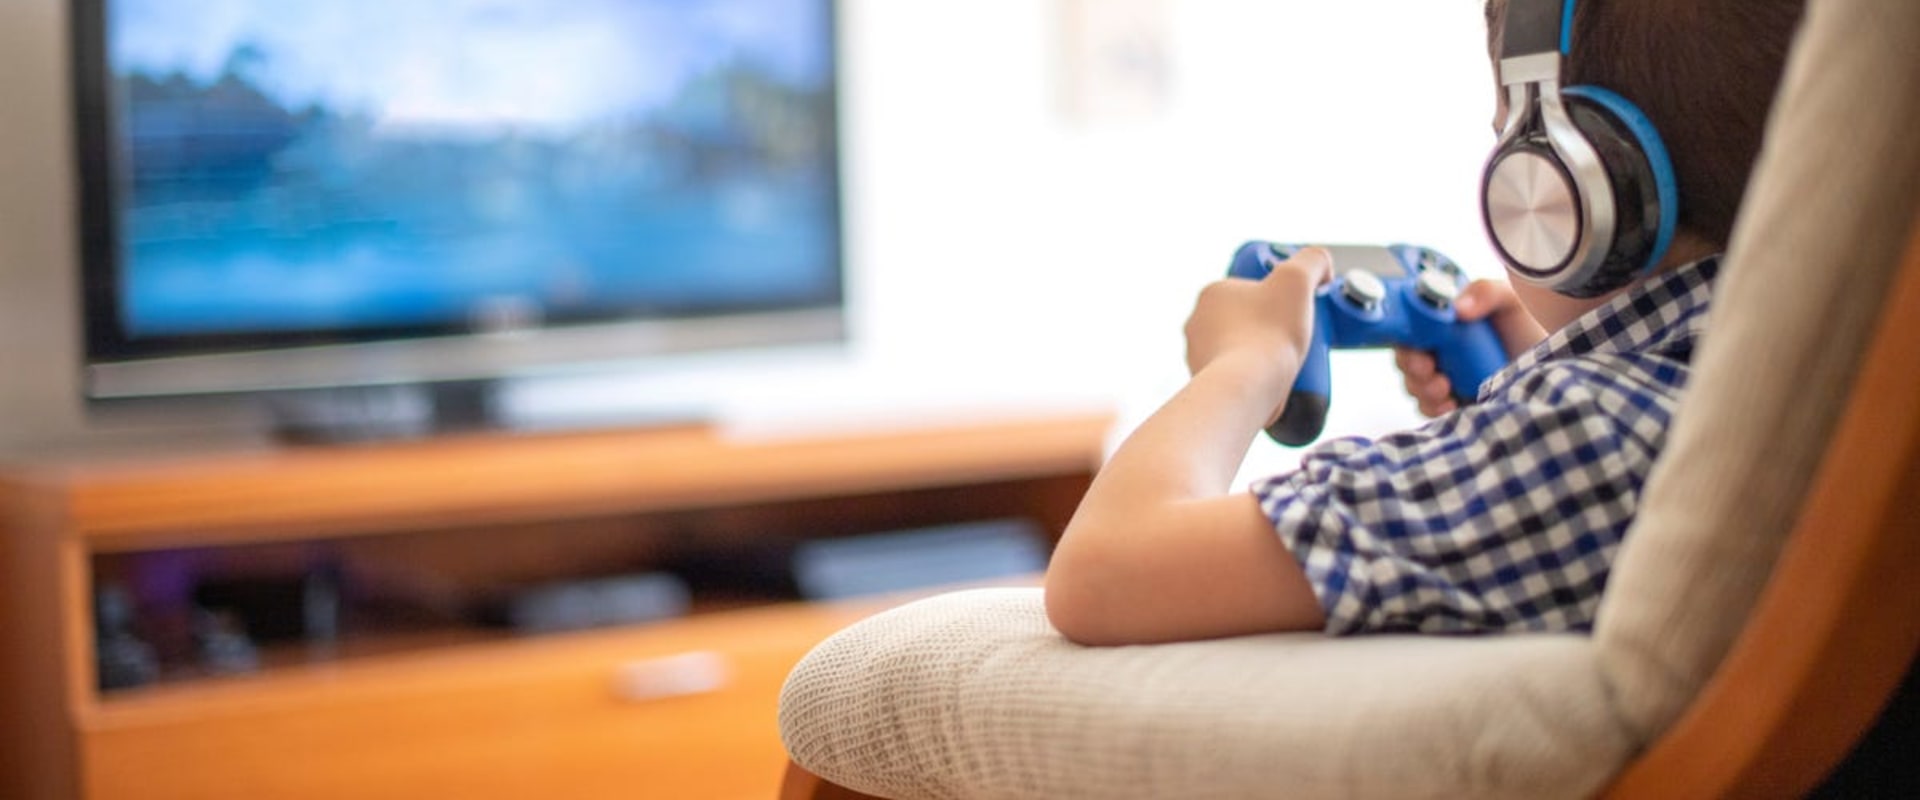 Can You Pause an Online Game? A Parent's Guide